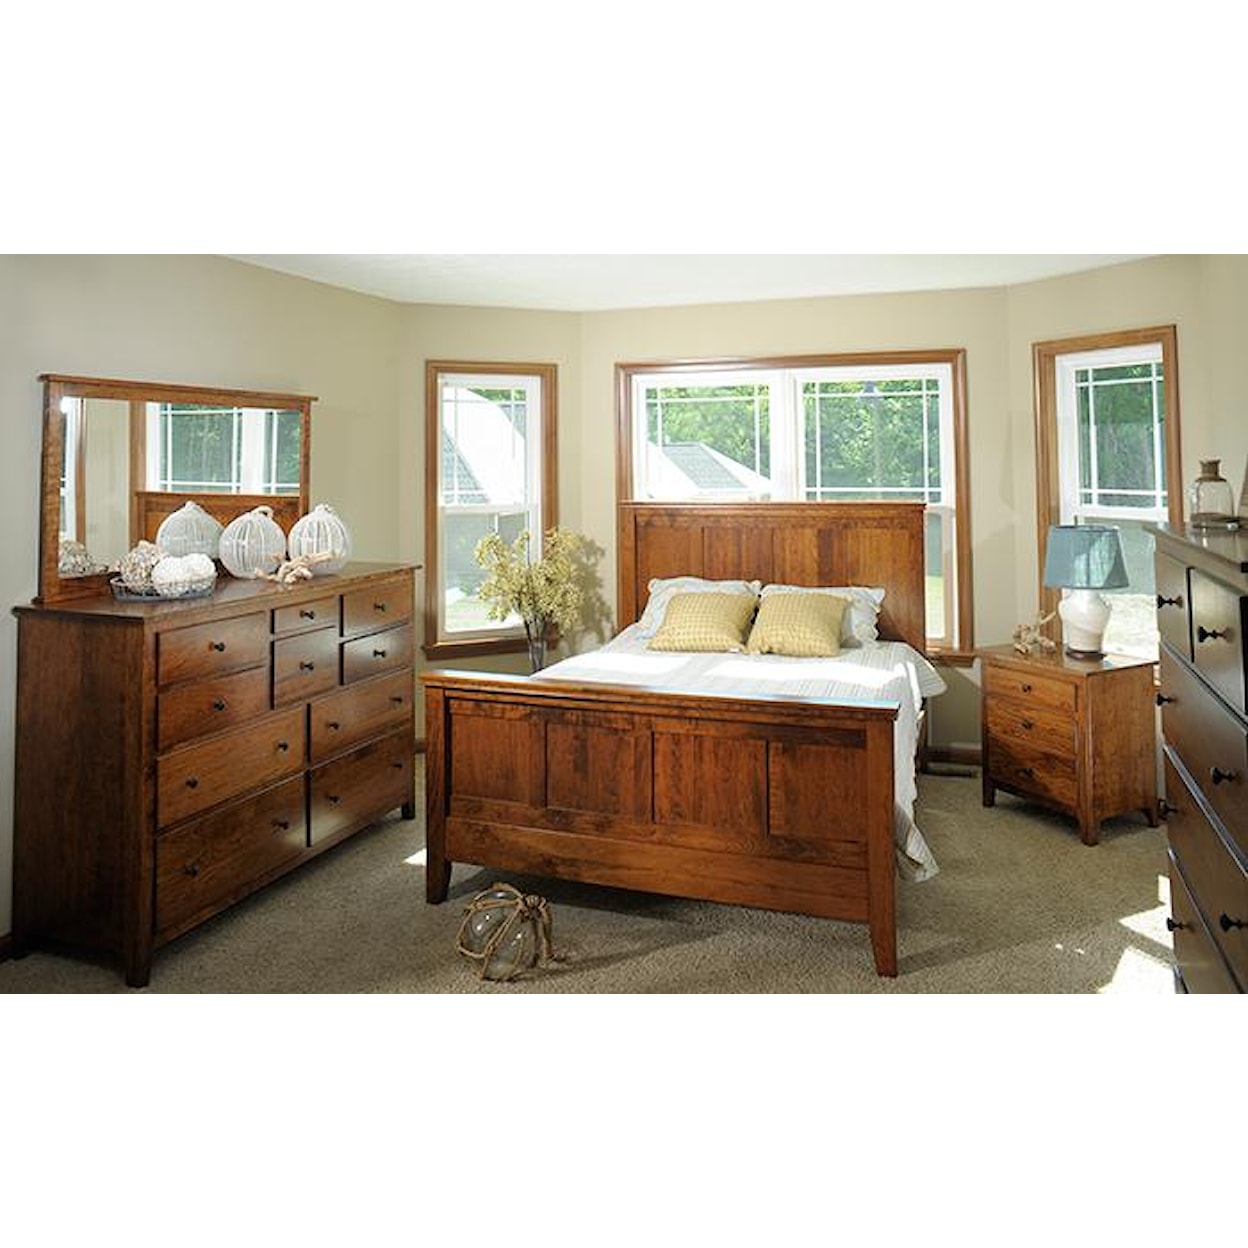 The Urban Collection Jamestown Square Queen Bedroom Group